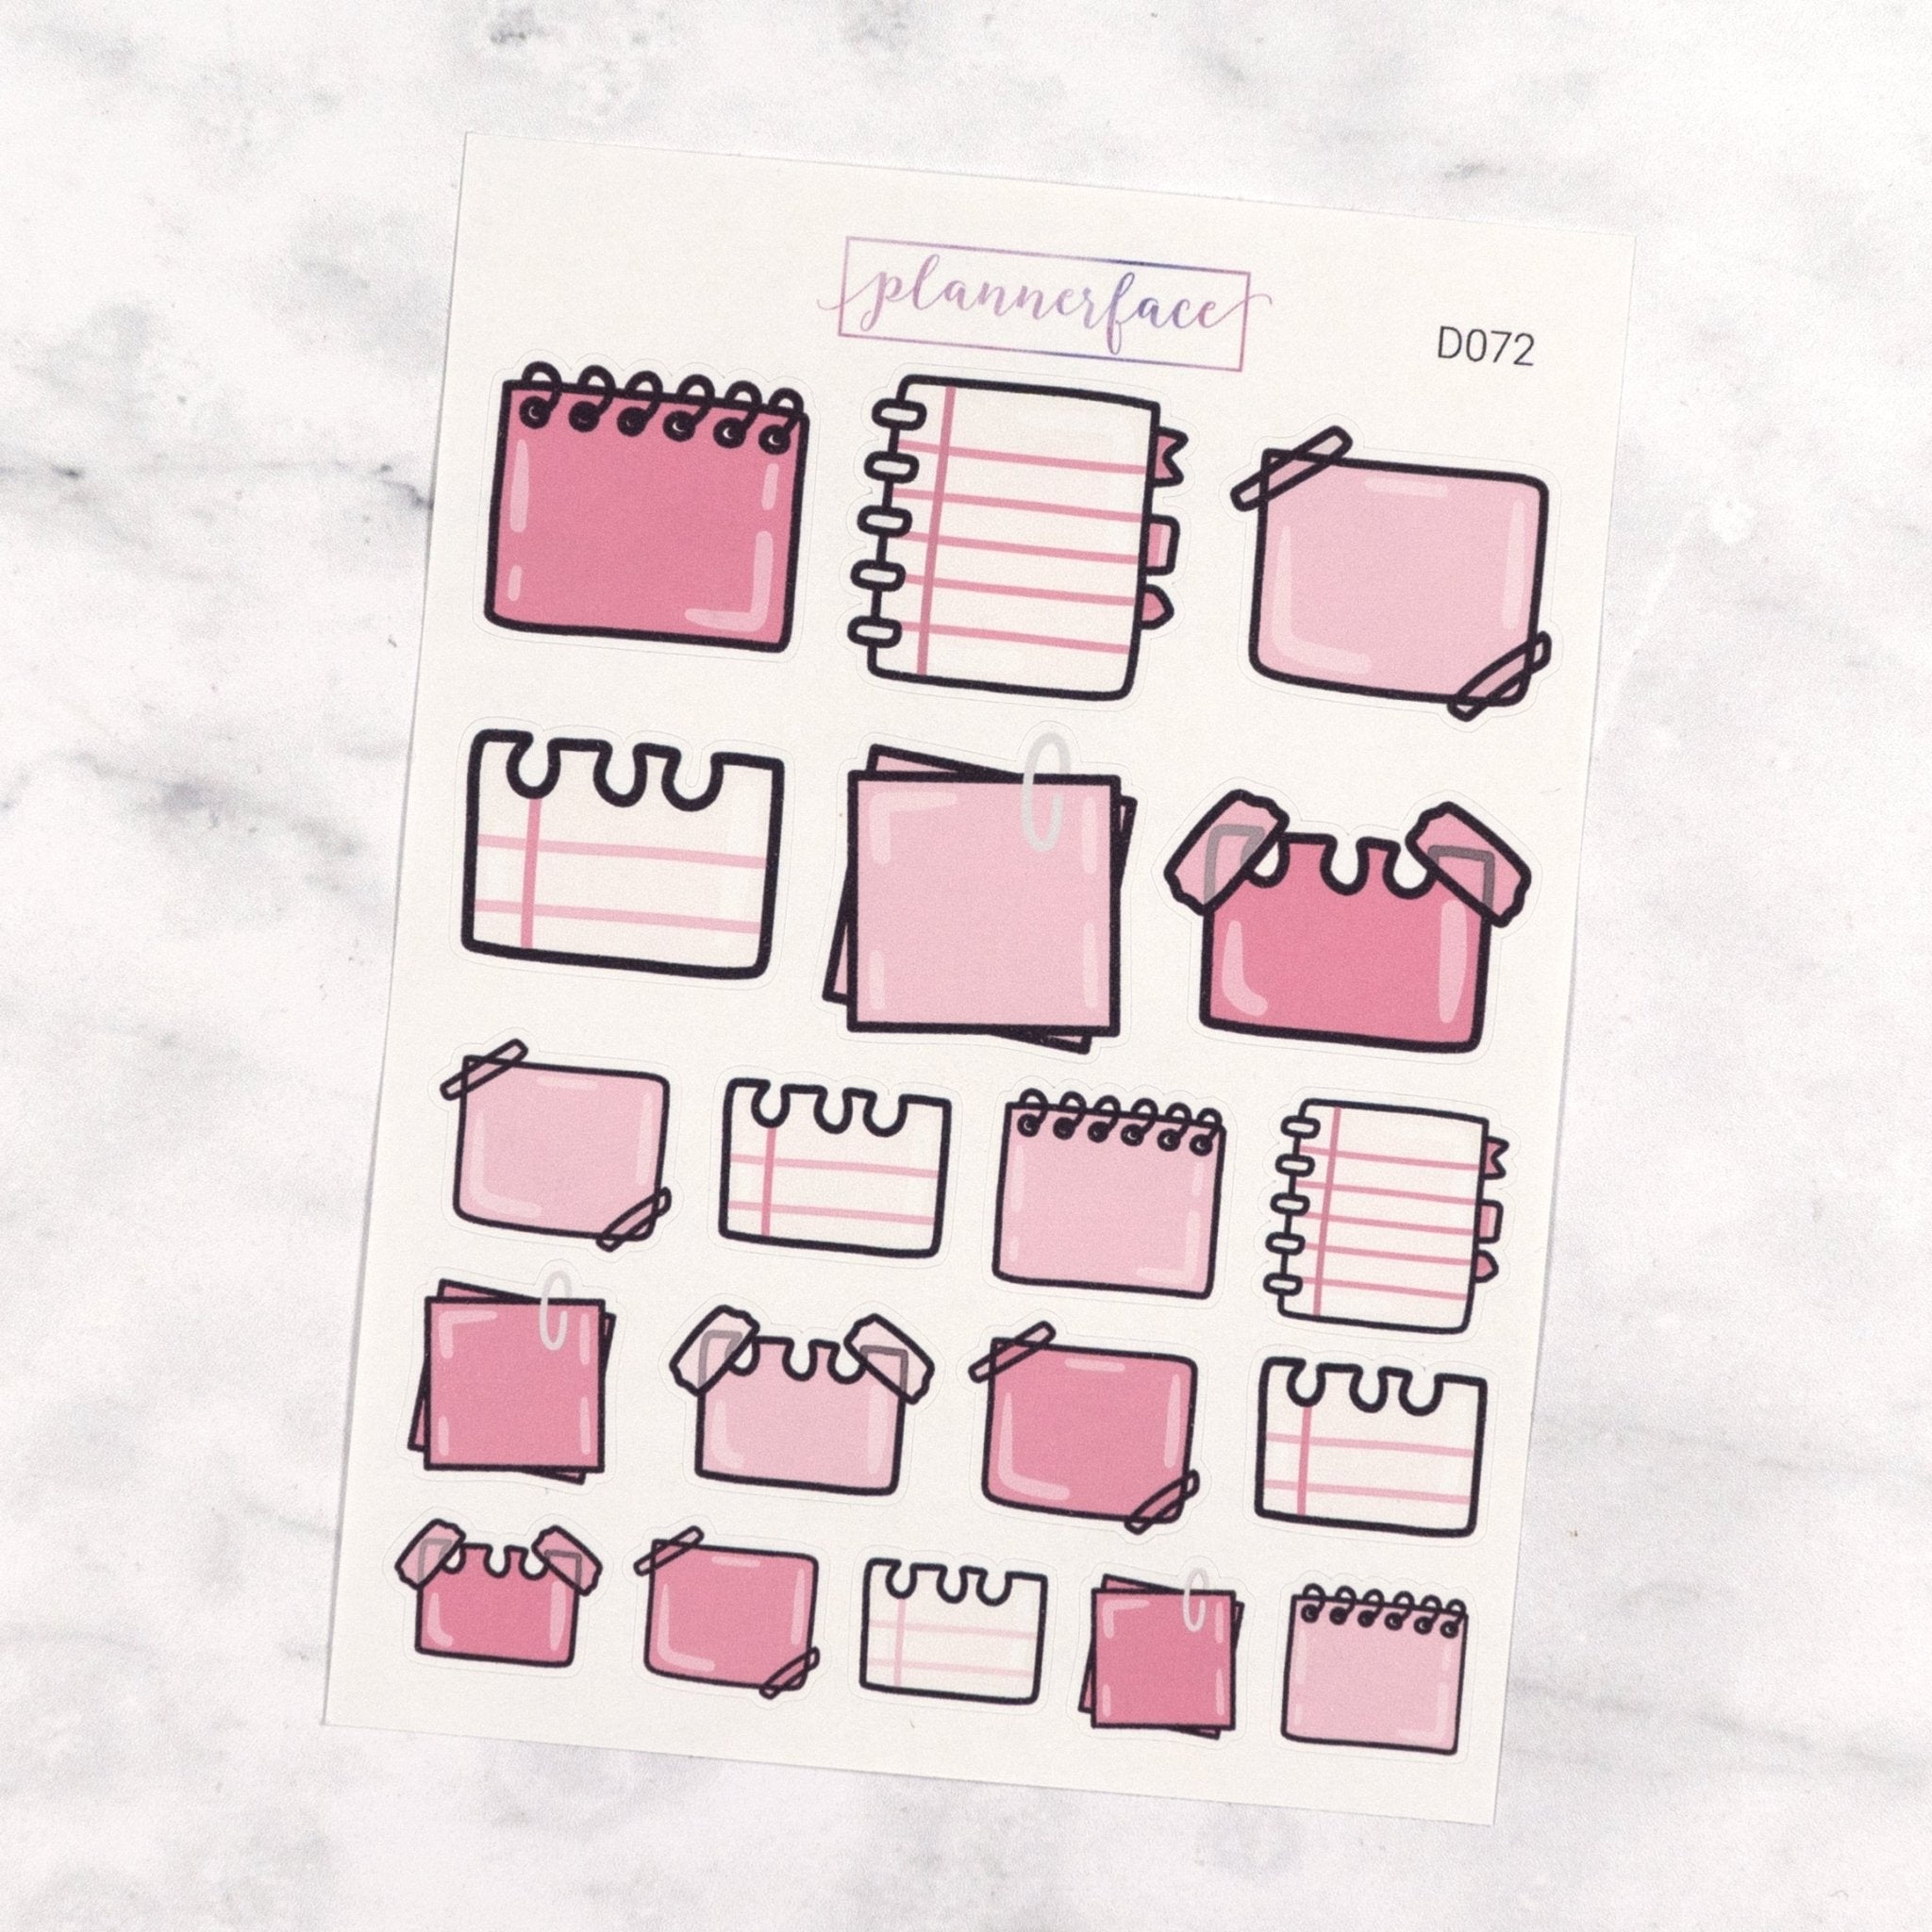 Hot Pink Note Paper Multicolour Doodles by Plannerface